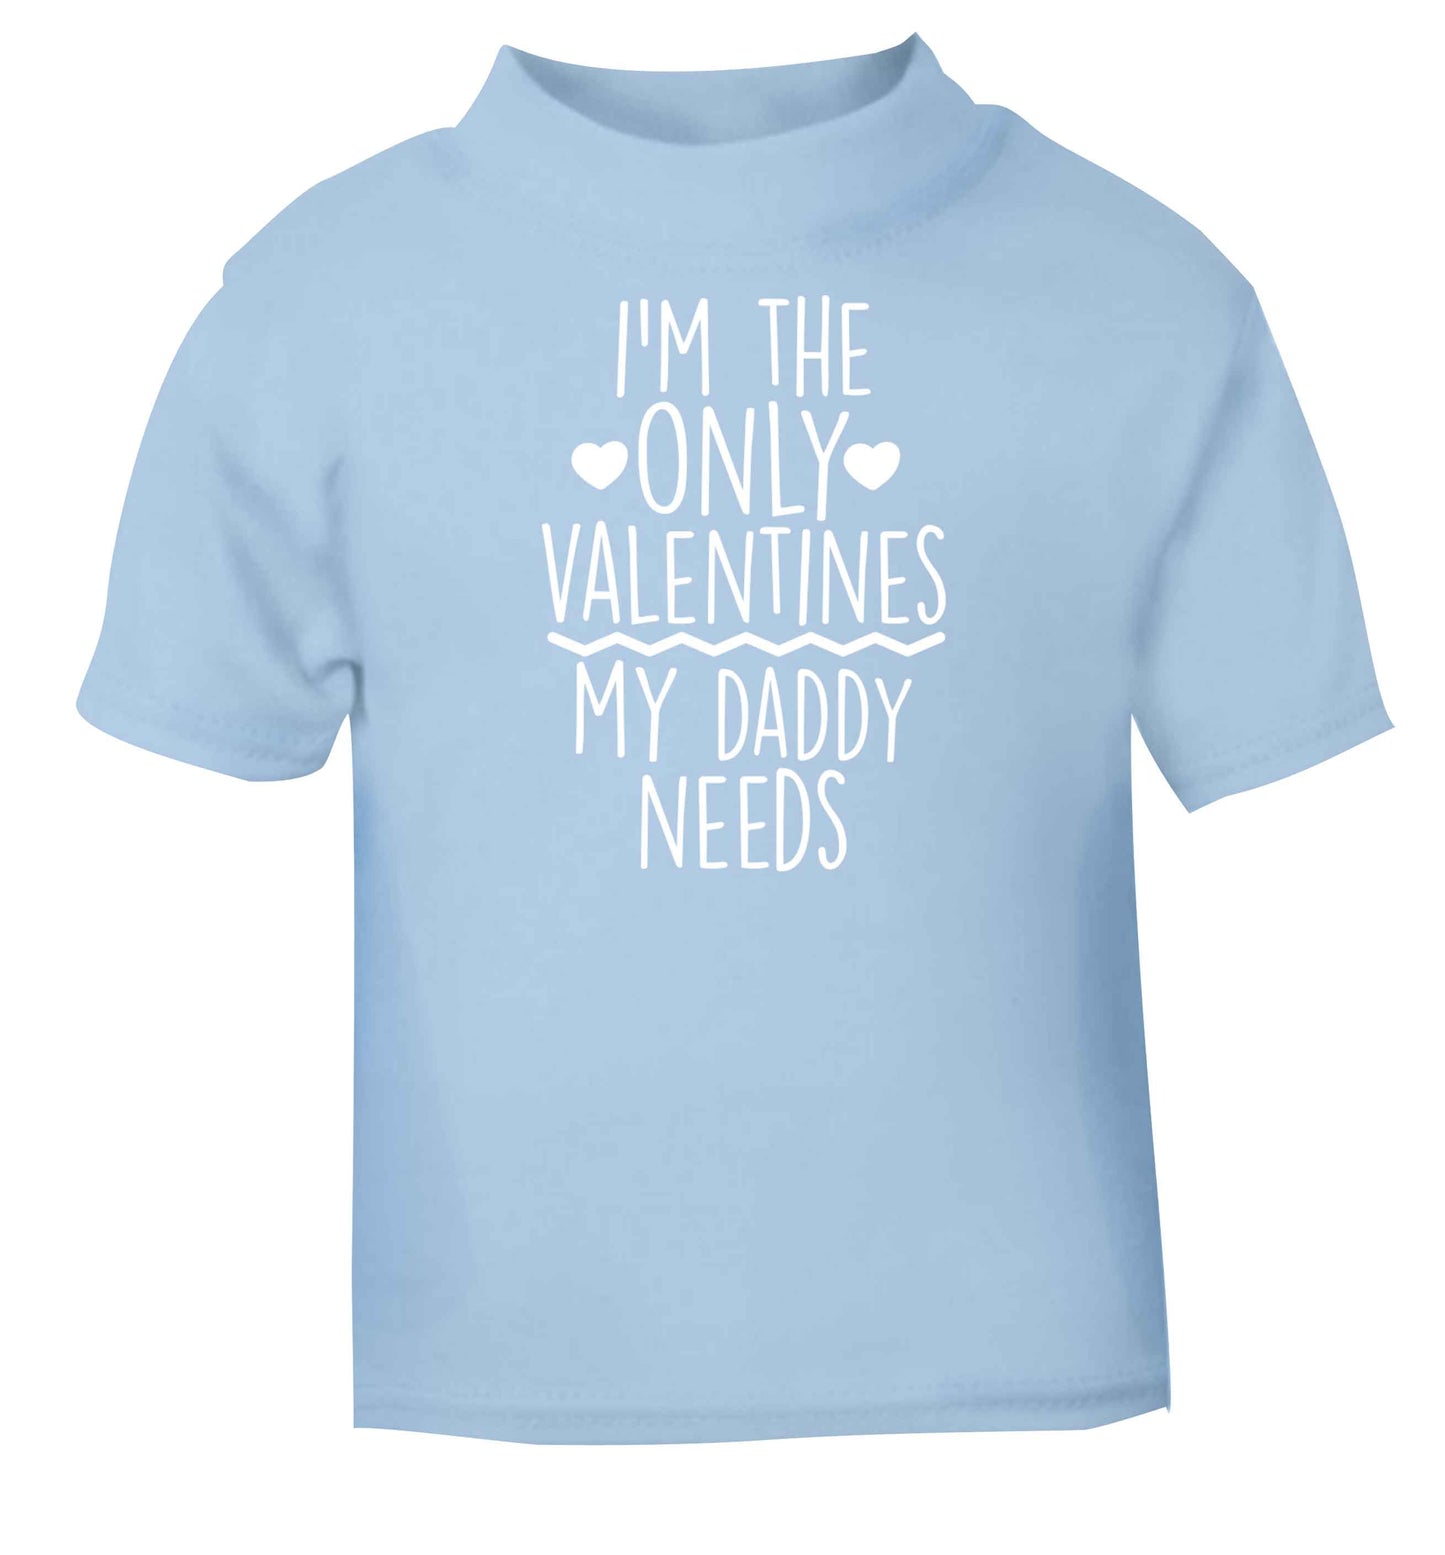 I'm the only valentines my daddy needs light blue baby toddler Tshirt 2 Years